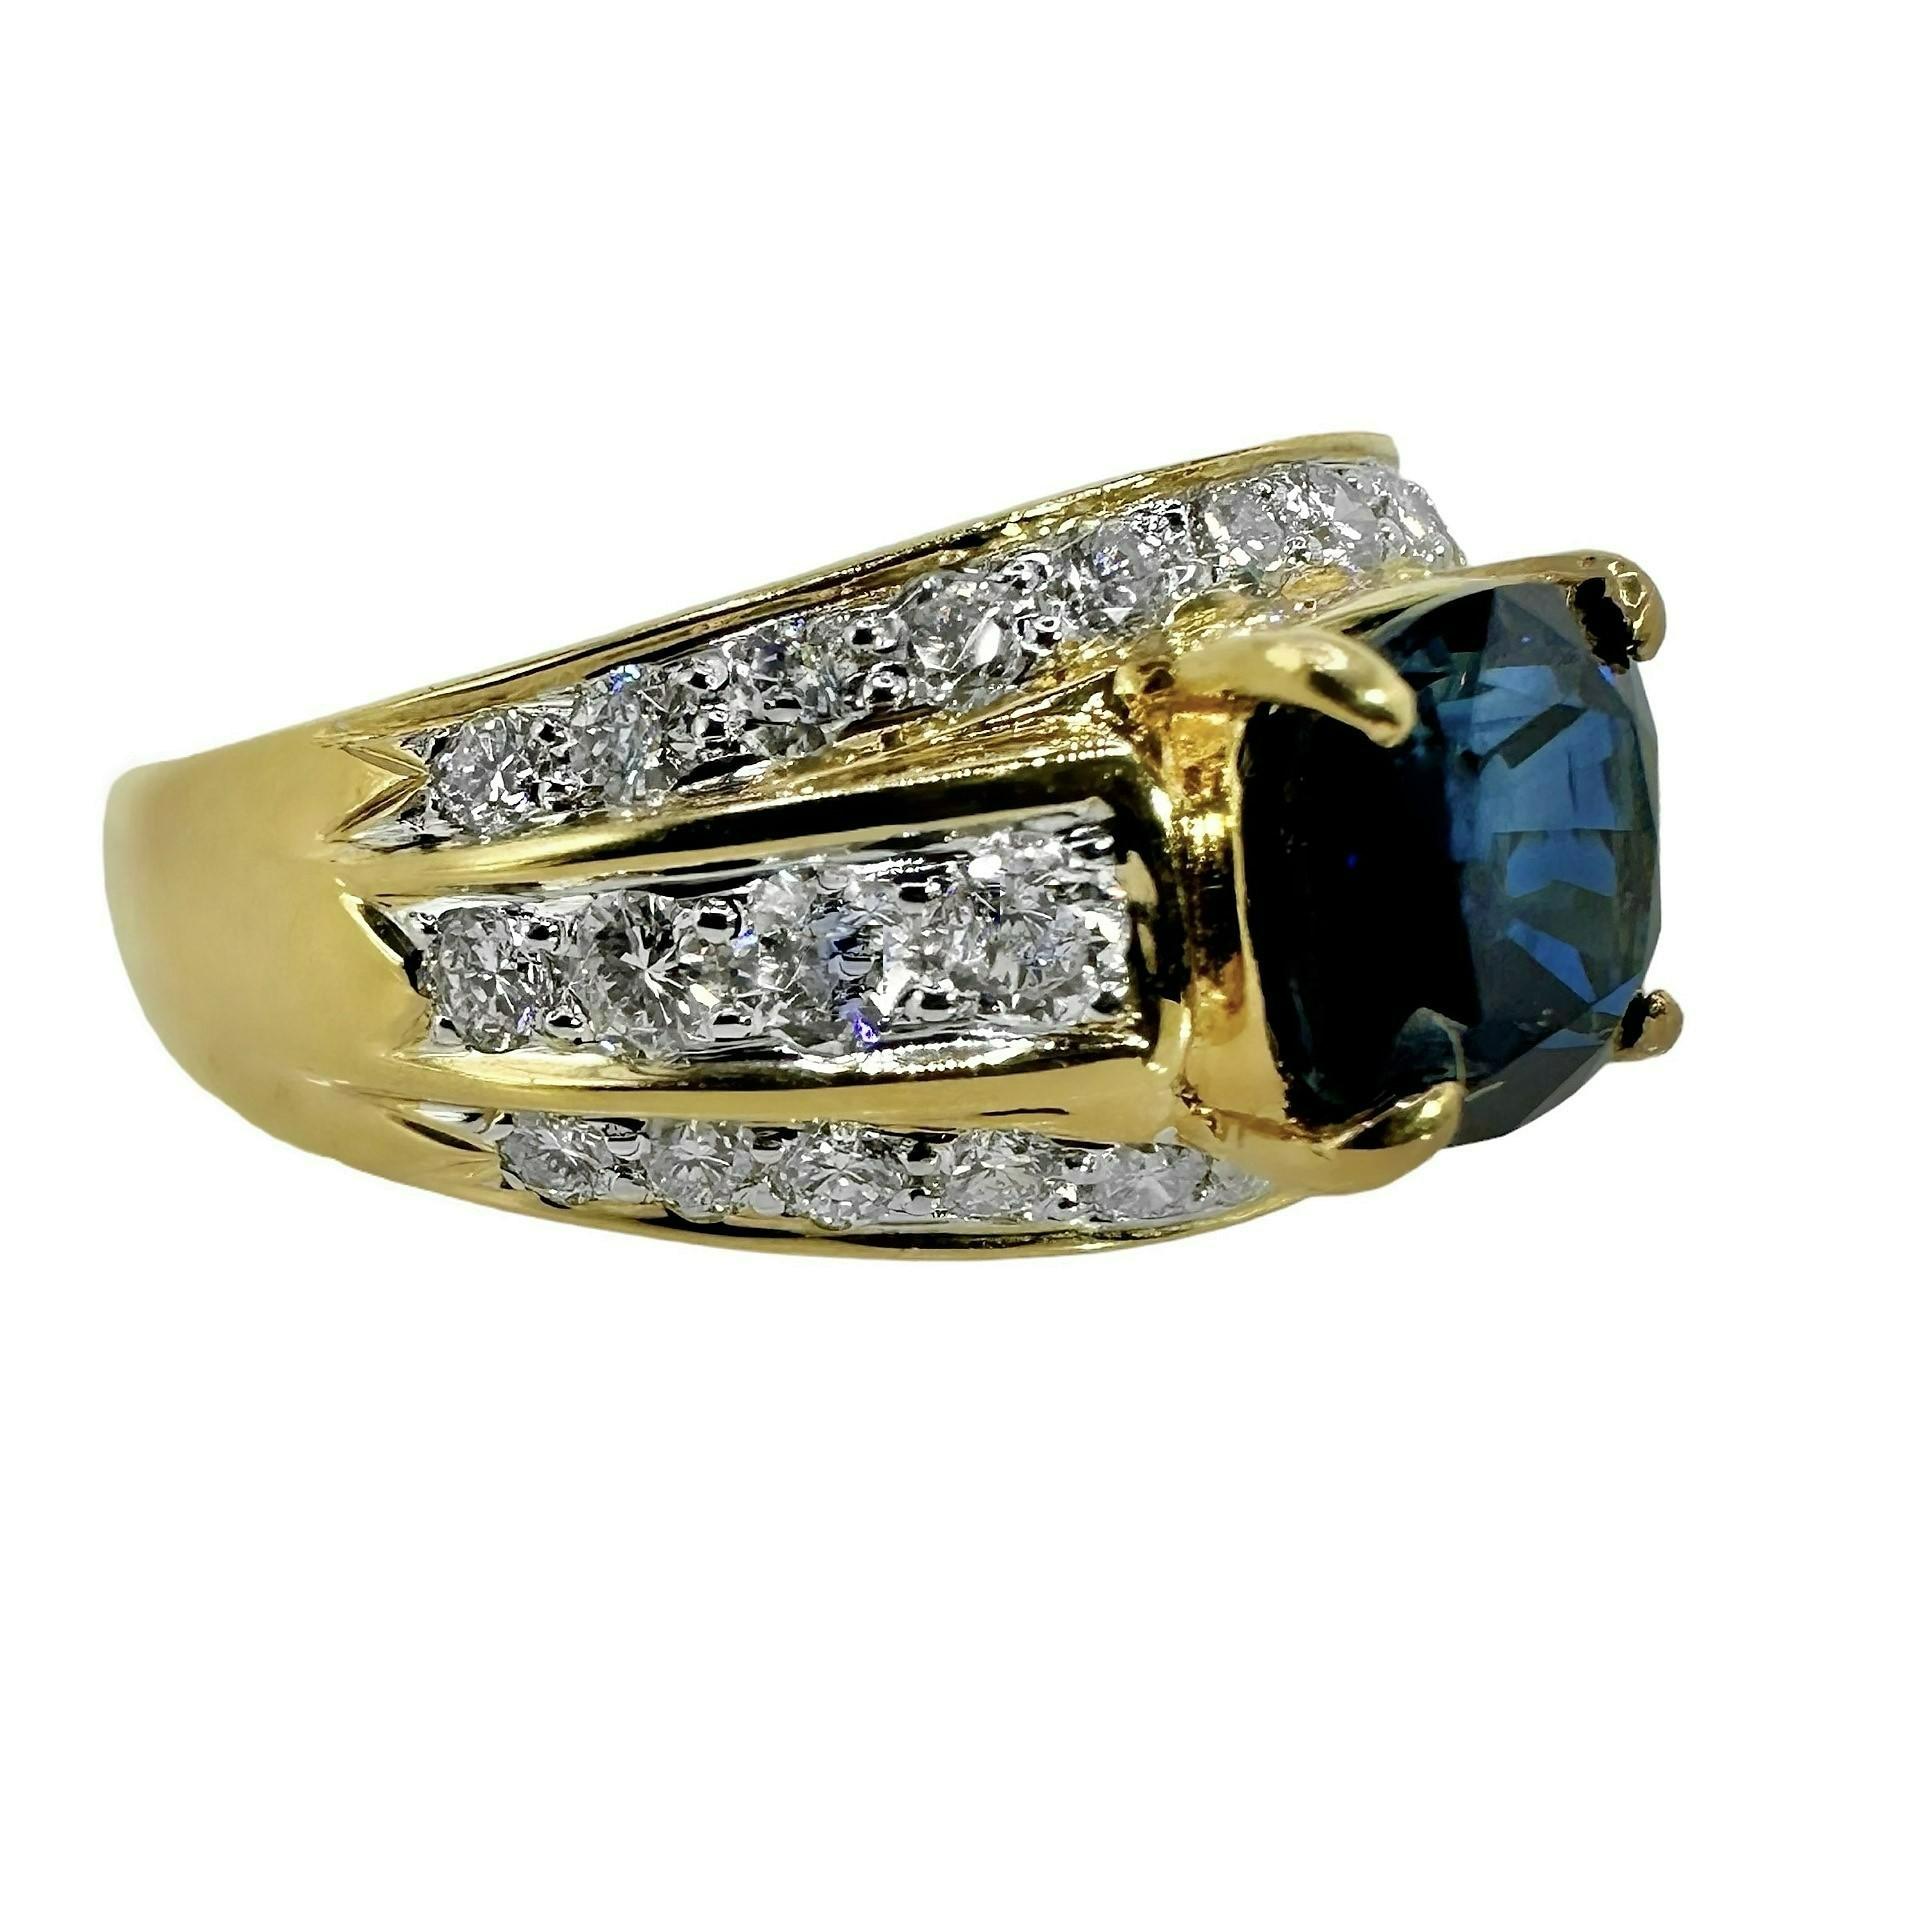 This beautifully crafted 18k yellow gold vintage cocktail ring is set with one cushion cut royal blue natural sapphire, flanked by three lines of brilliant cut diamonds. This stylish design is a classic, and is as beautiful today and it was when it